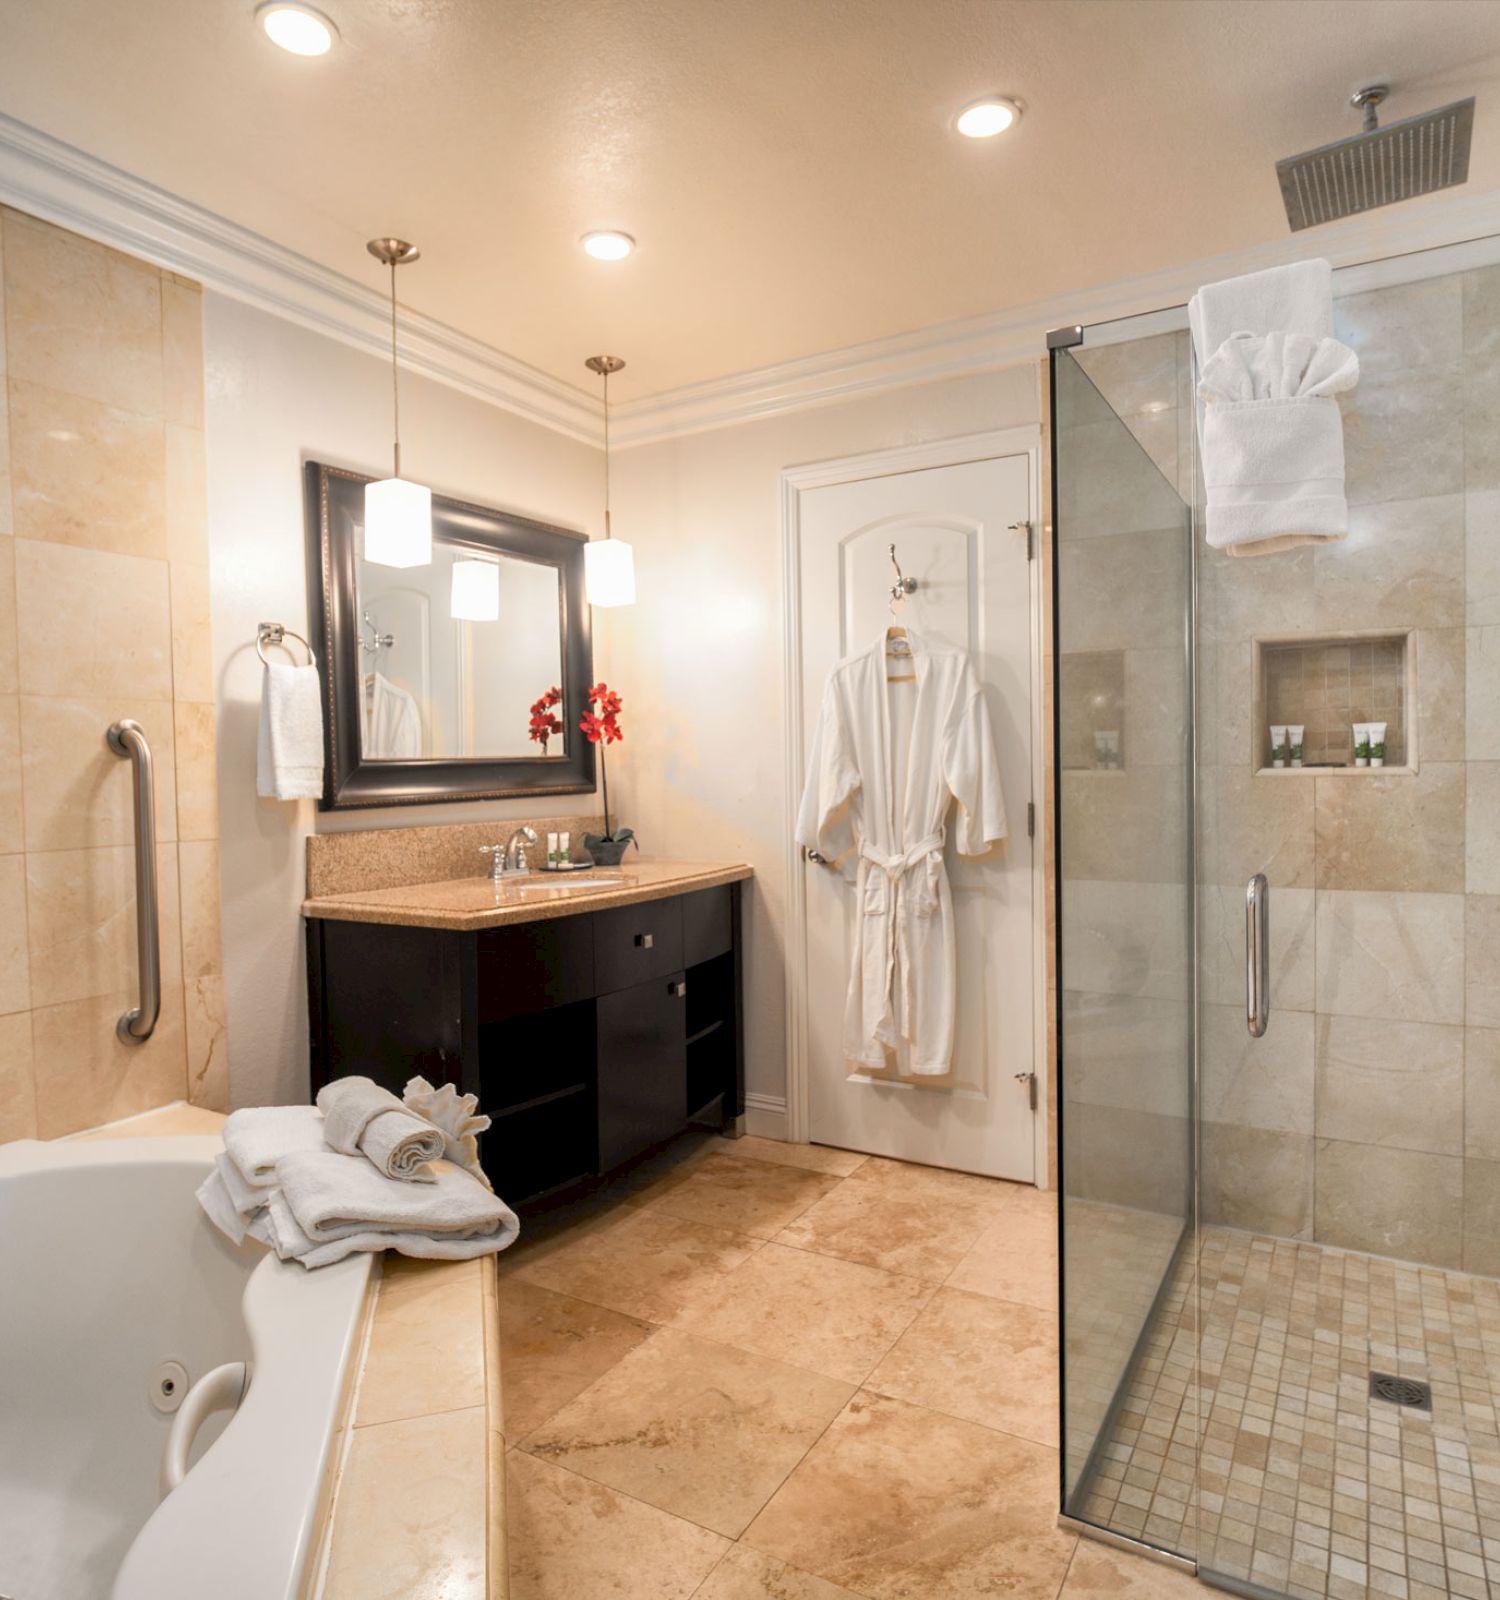 This image shows a luxurious bathroom with a bathtub, glass-enclosed shower, vanity with mirror, hanging robes, and a towel rack with folded towels.